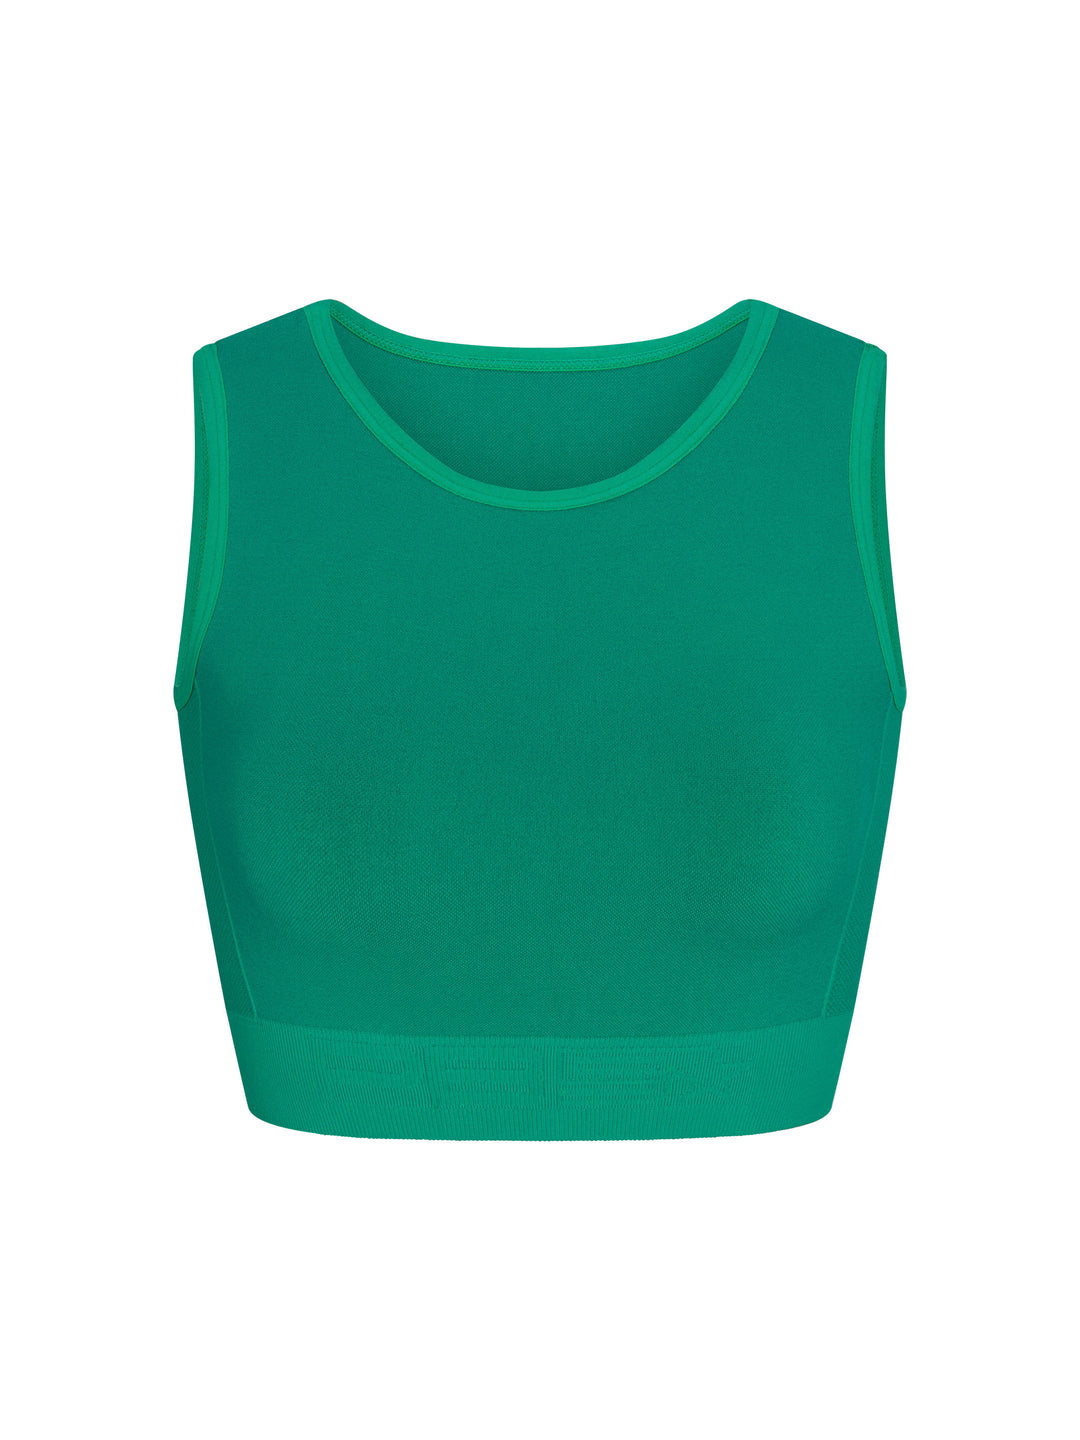 Compression Knit Sports Bra front view in Jade.